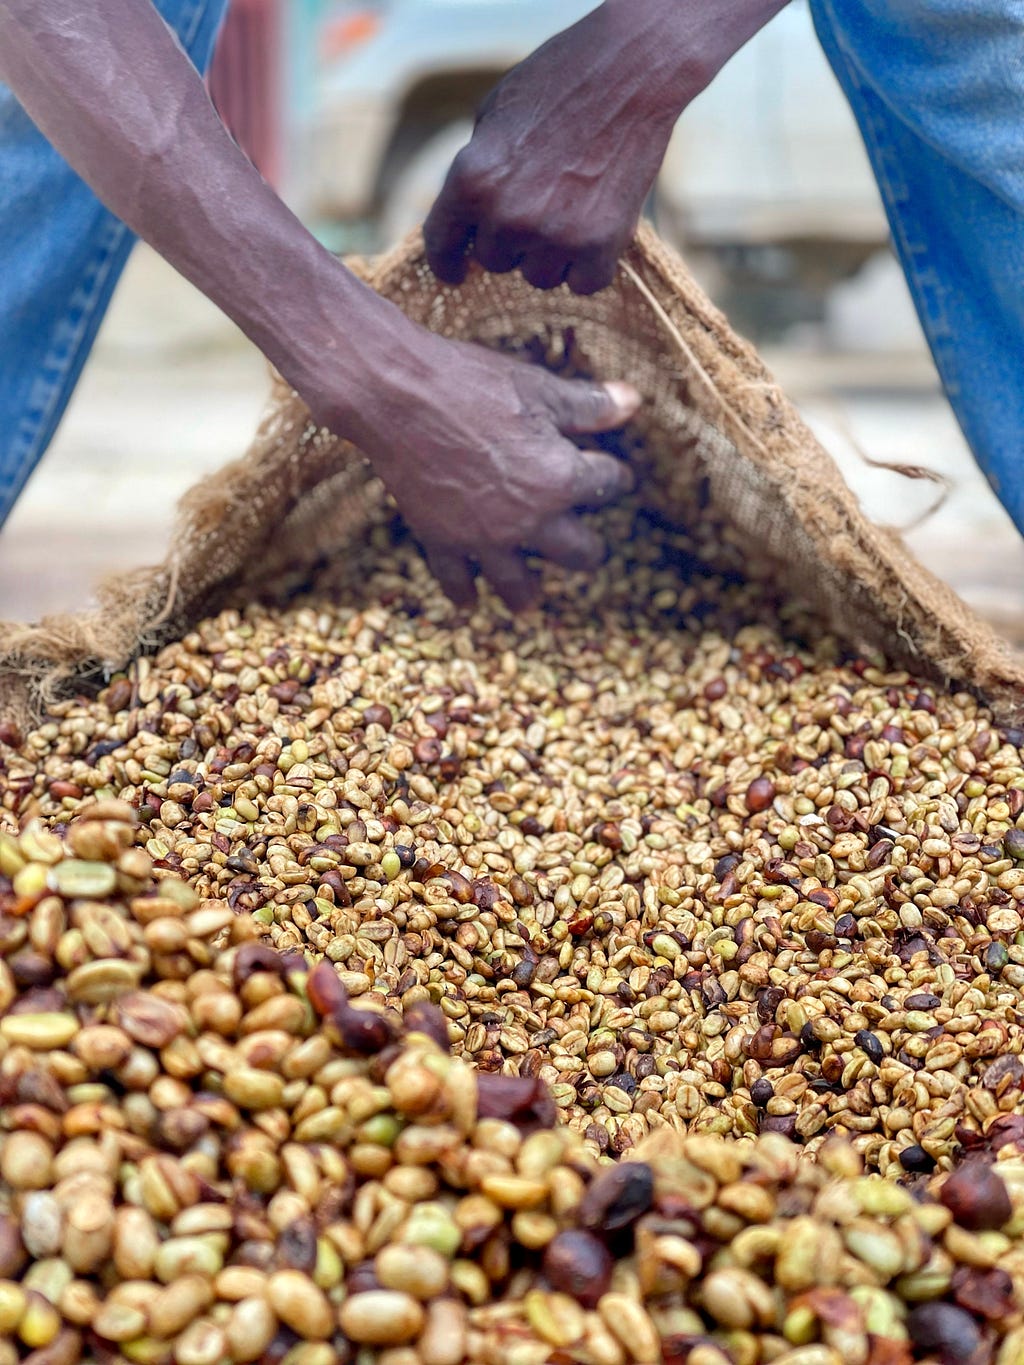 A man’s hand scooping coffee beans into a sack.